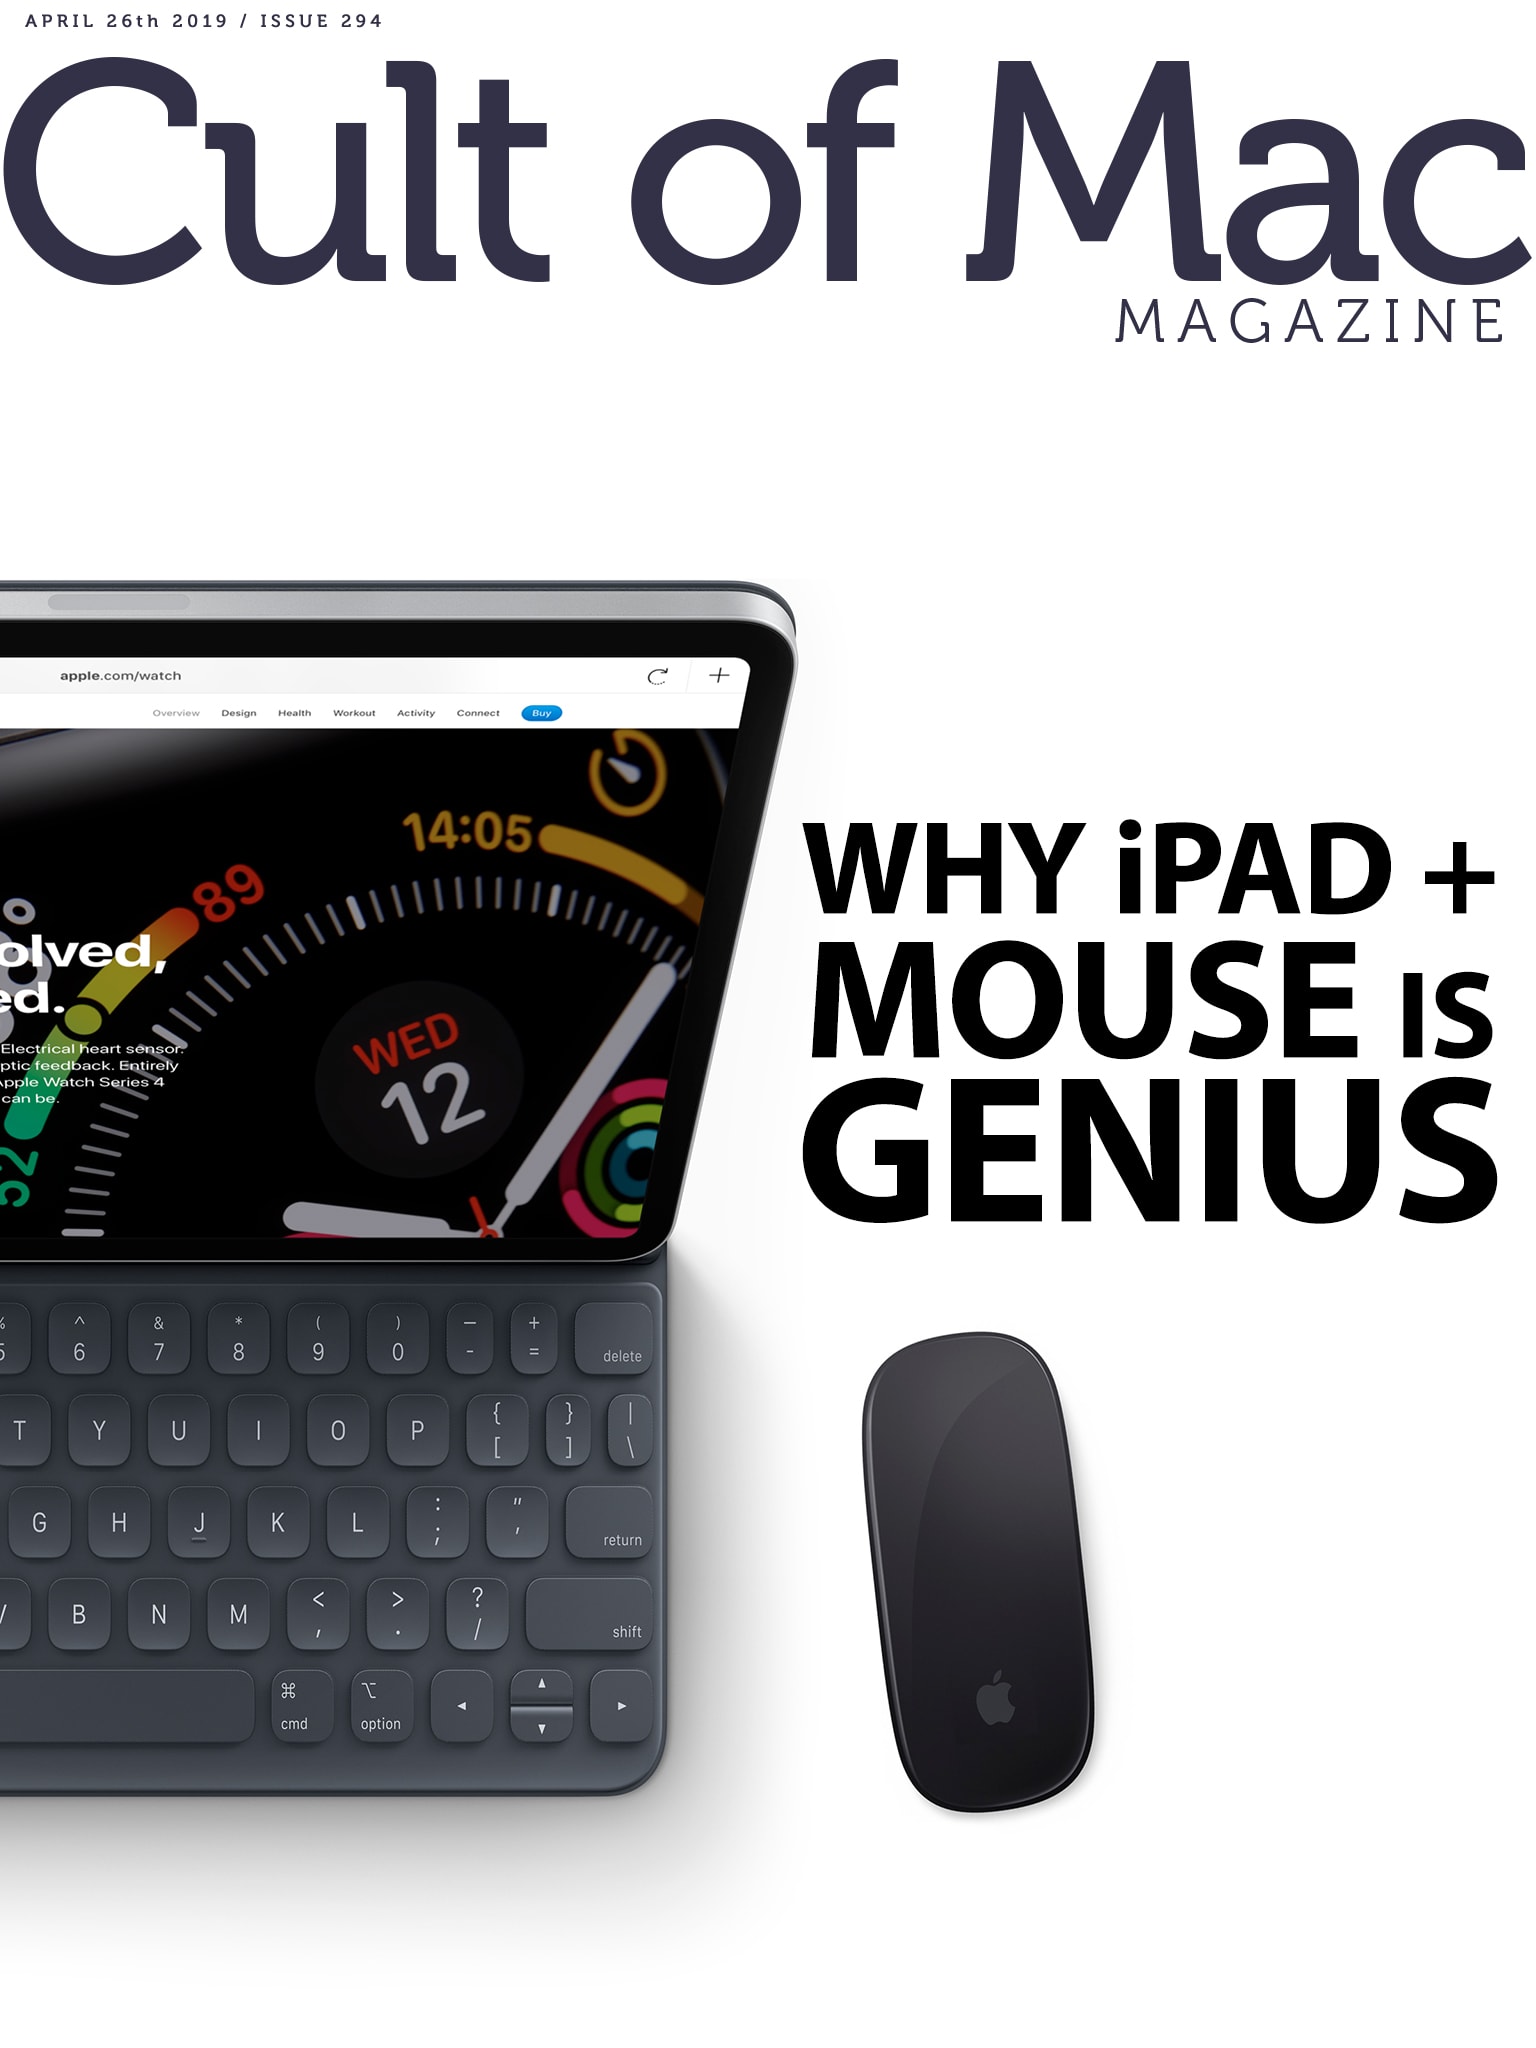 Actually, using a mouse with an iPad sounds pretty awesome.